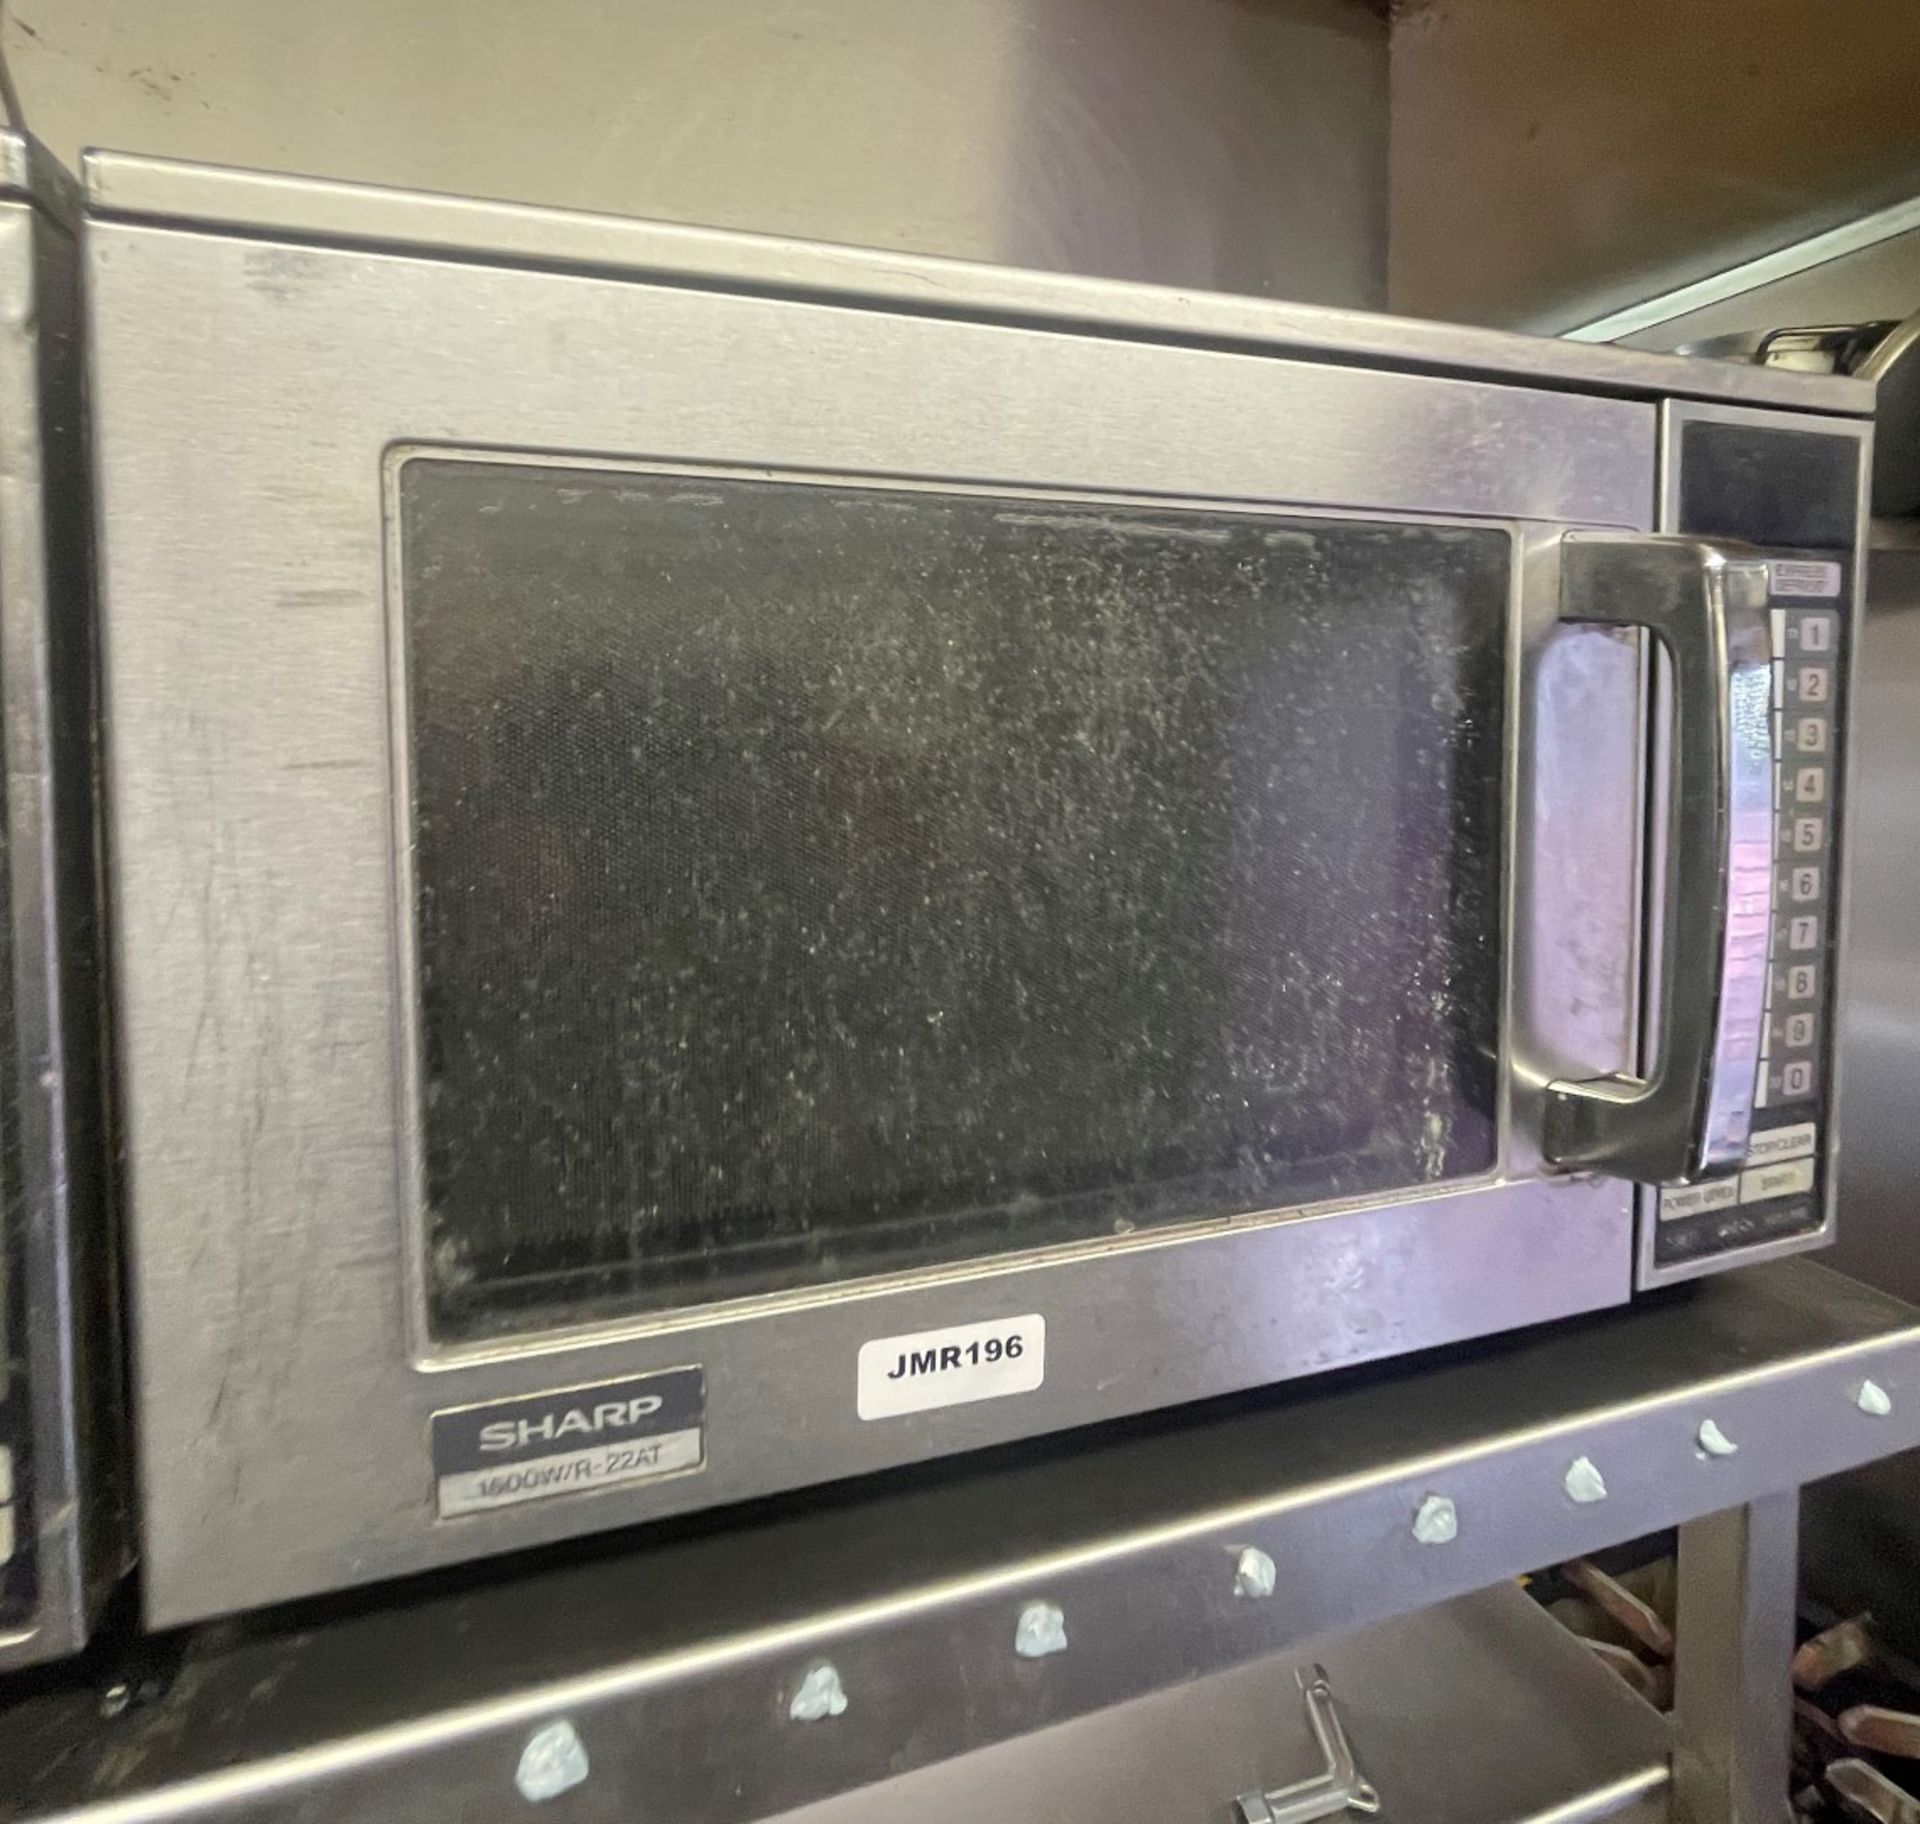 1 x Sharp 1500w Commercial Microwave Oven - Ref: JMR196 - CL782 - Location: Leicester, LE2Collection - Image 2 of 5